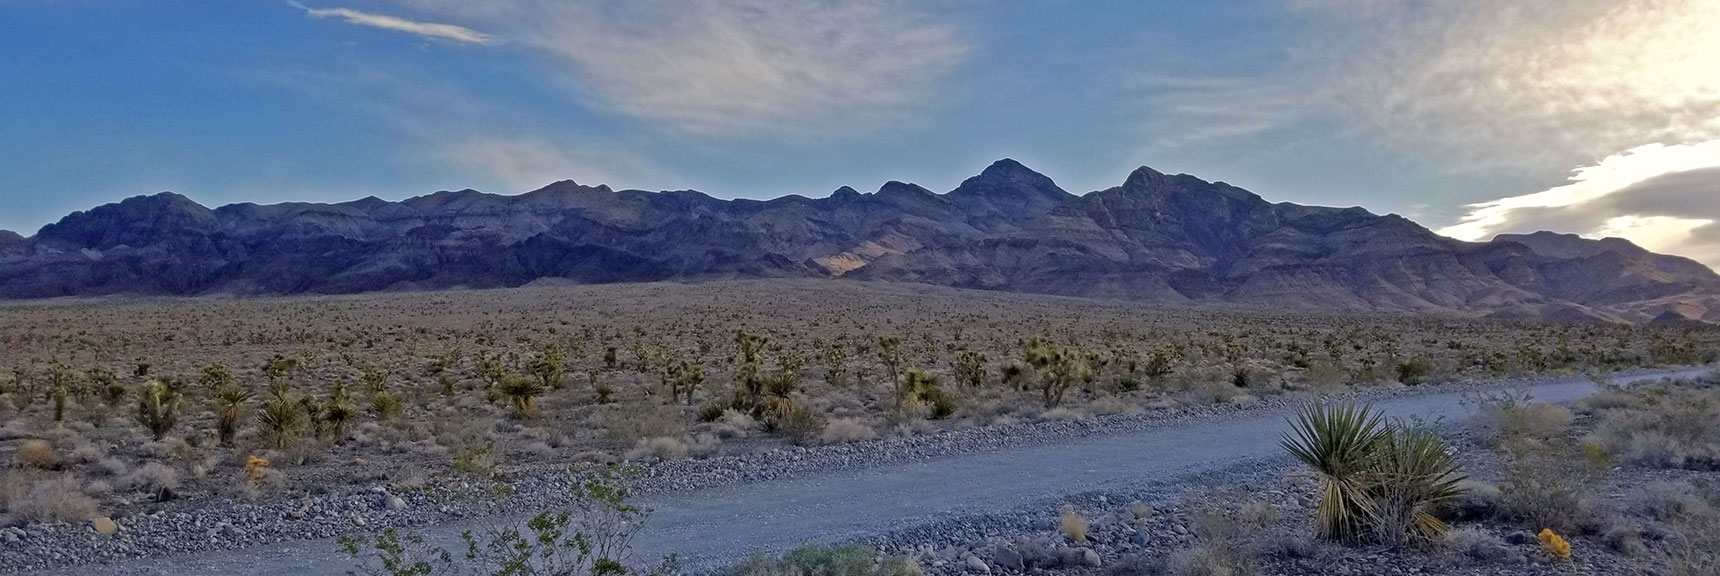 Early Morning View of Sheep Range from Mormon Well Road | Fossil Ridge End to End | Sheep Range | Desert National Wildlife Refuge, Nevada